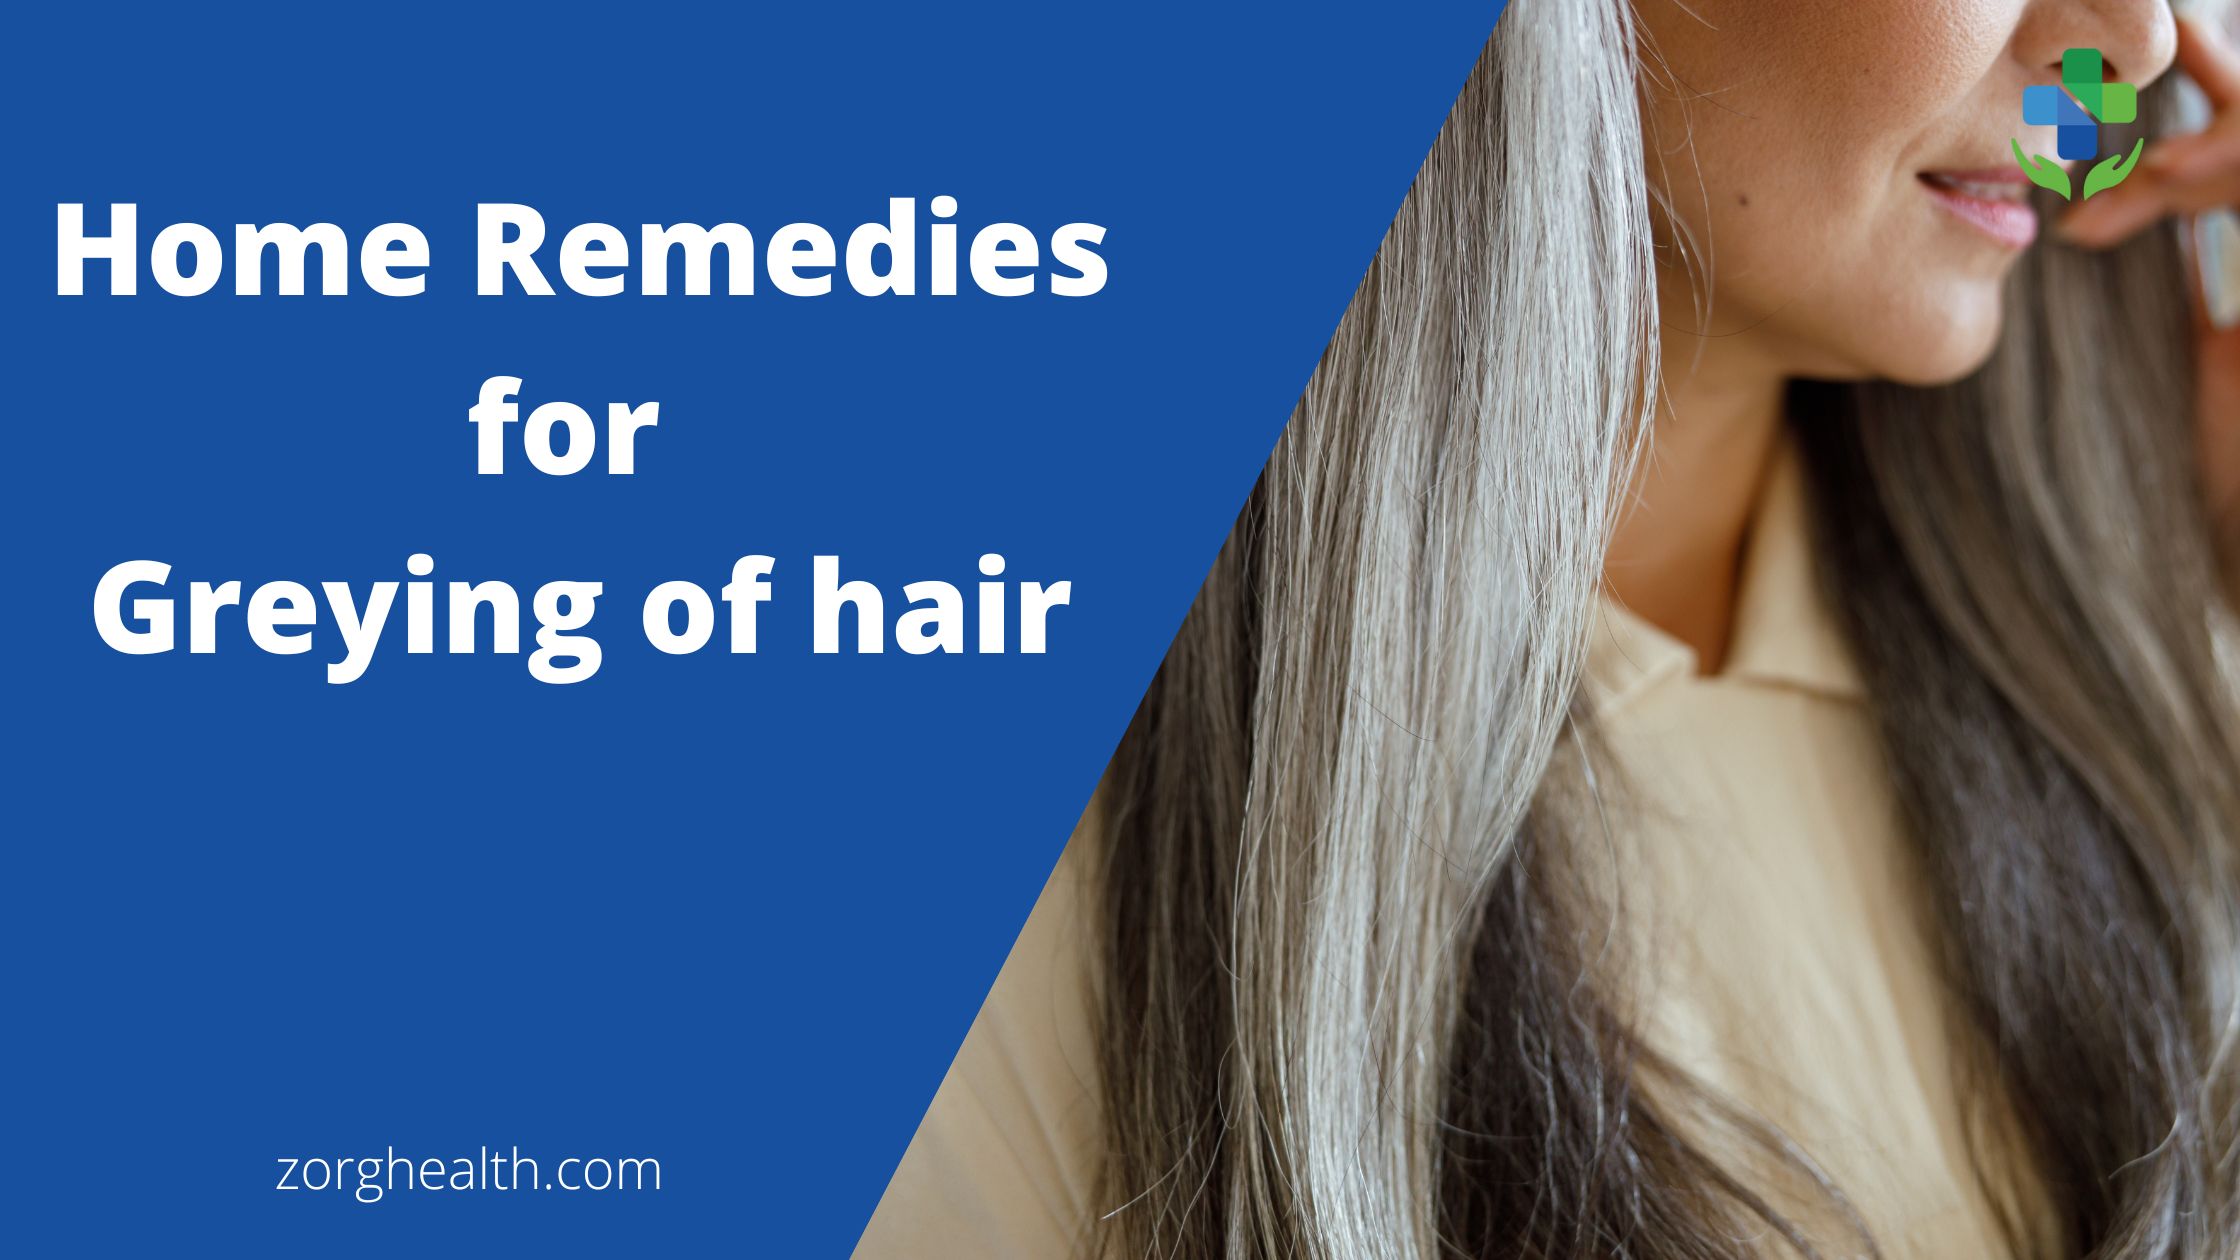 Home Remedies for Greying of hair - Zorg Health